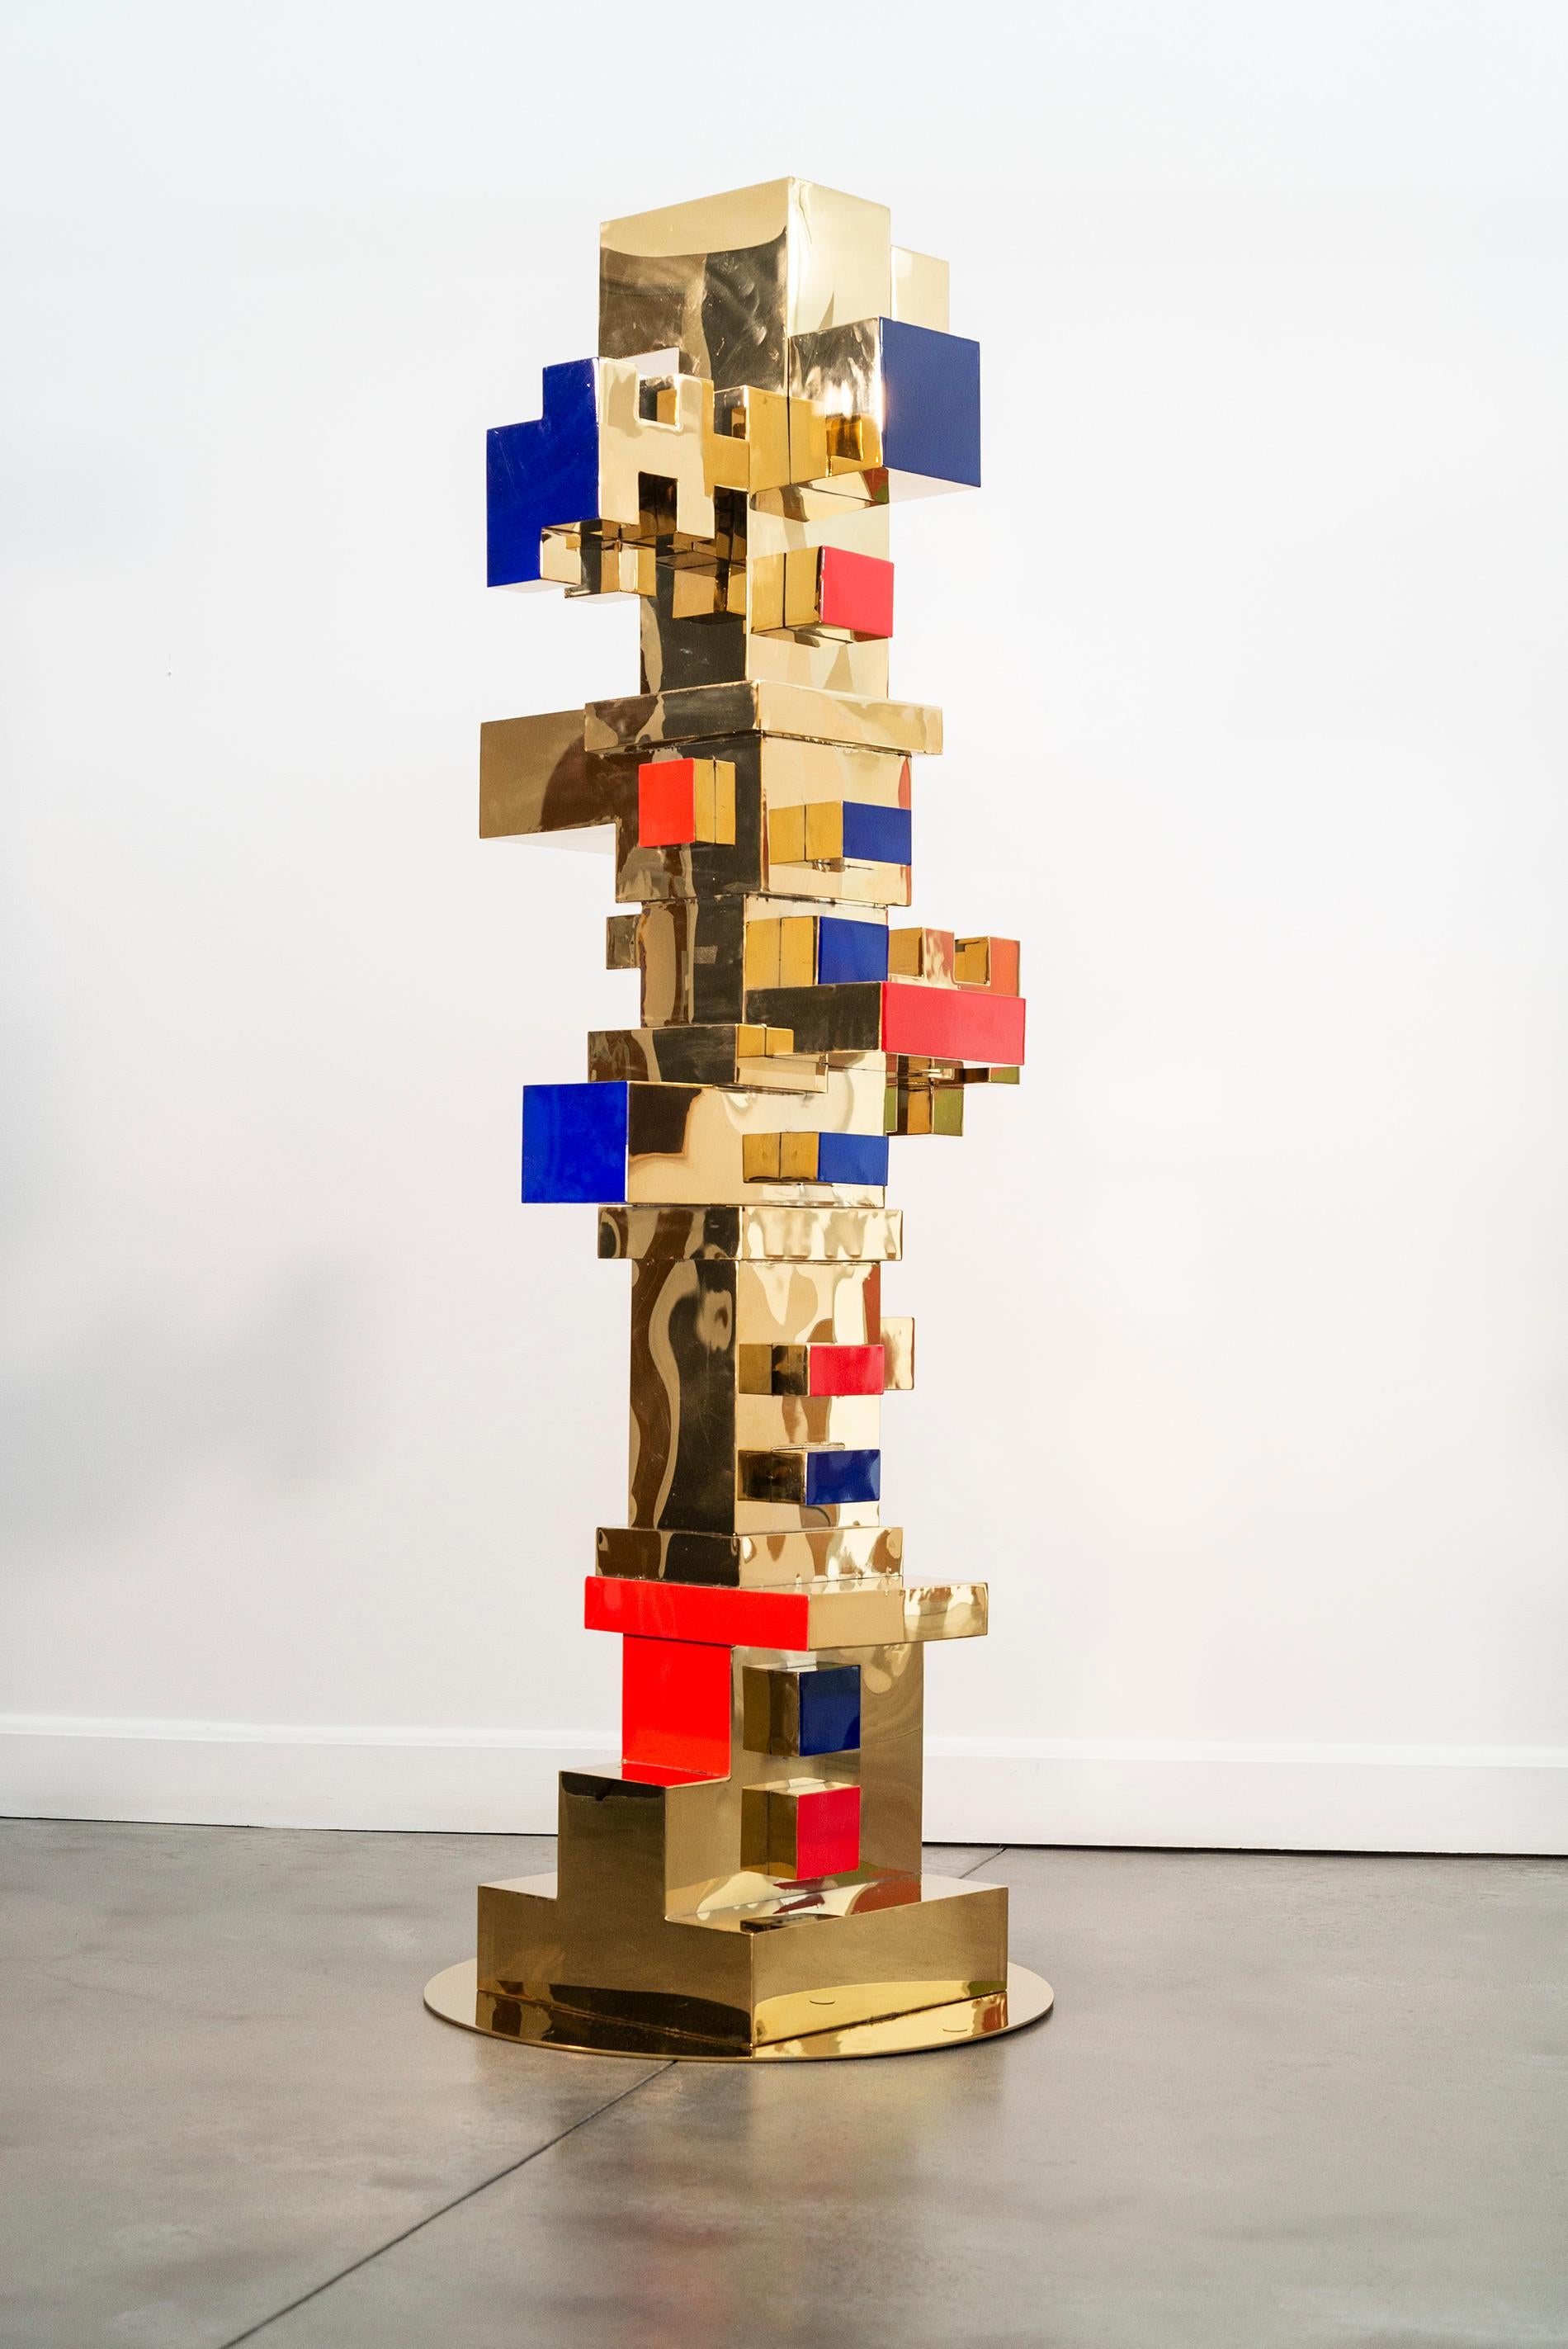 Viktor Mitic Abstract Sculpture - Stacked Blocks - Gold, Red, Blue - totem, gold plated, stainless steel sculpture